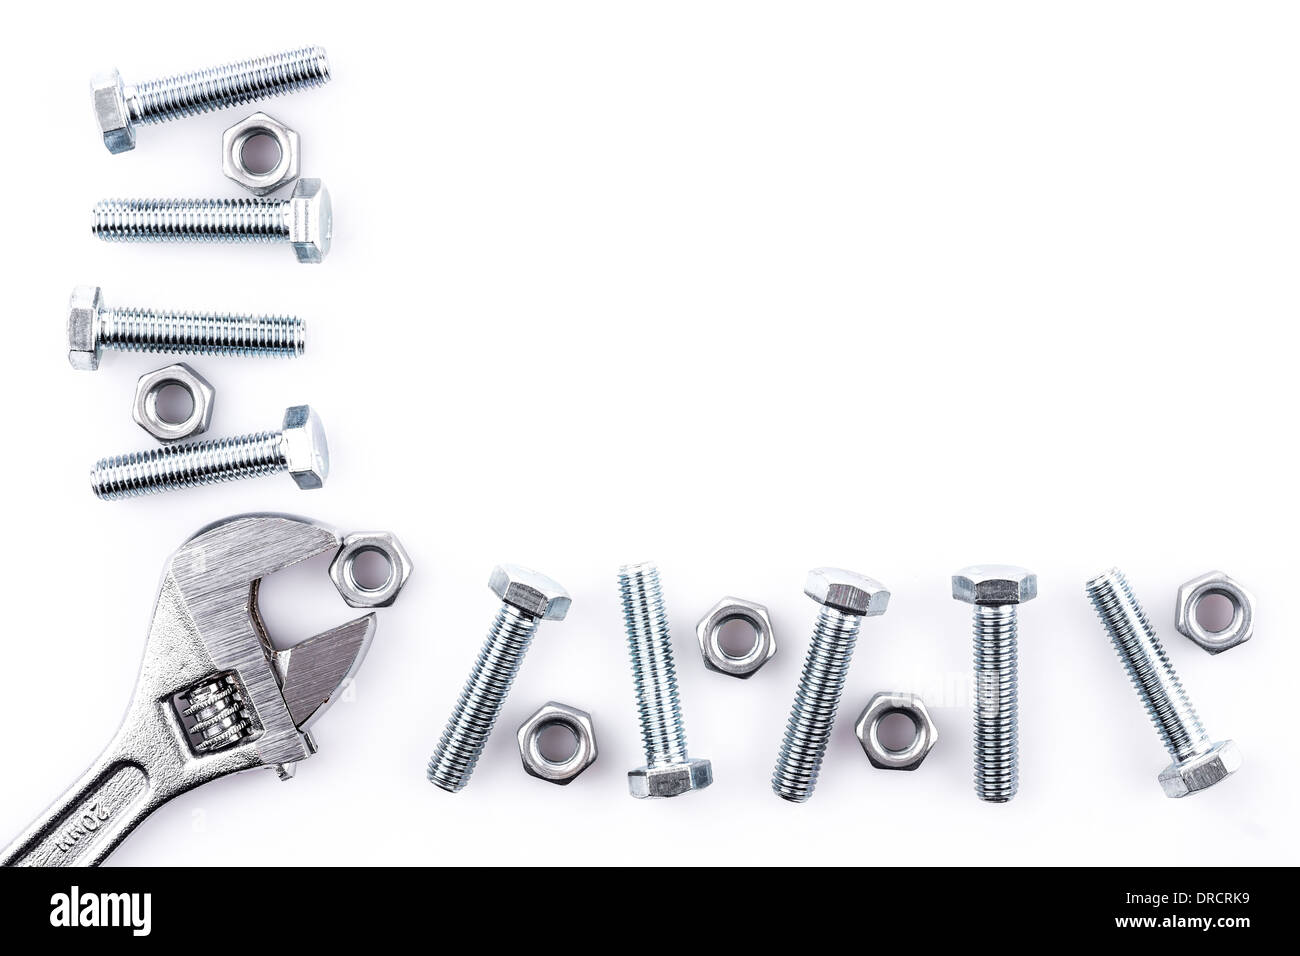 Screws, nuts and spanner isolated on white background Stock Photo